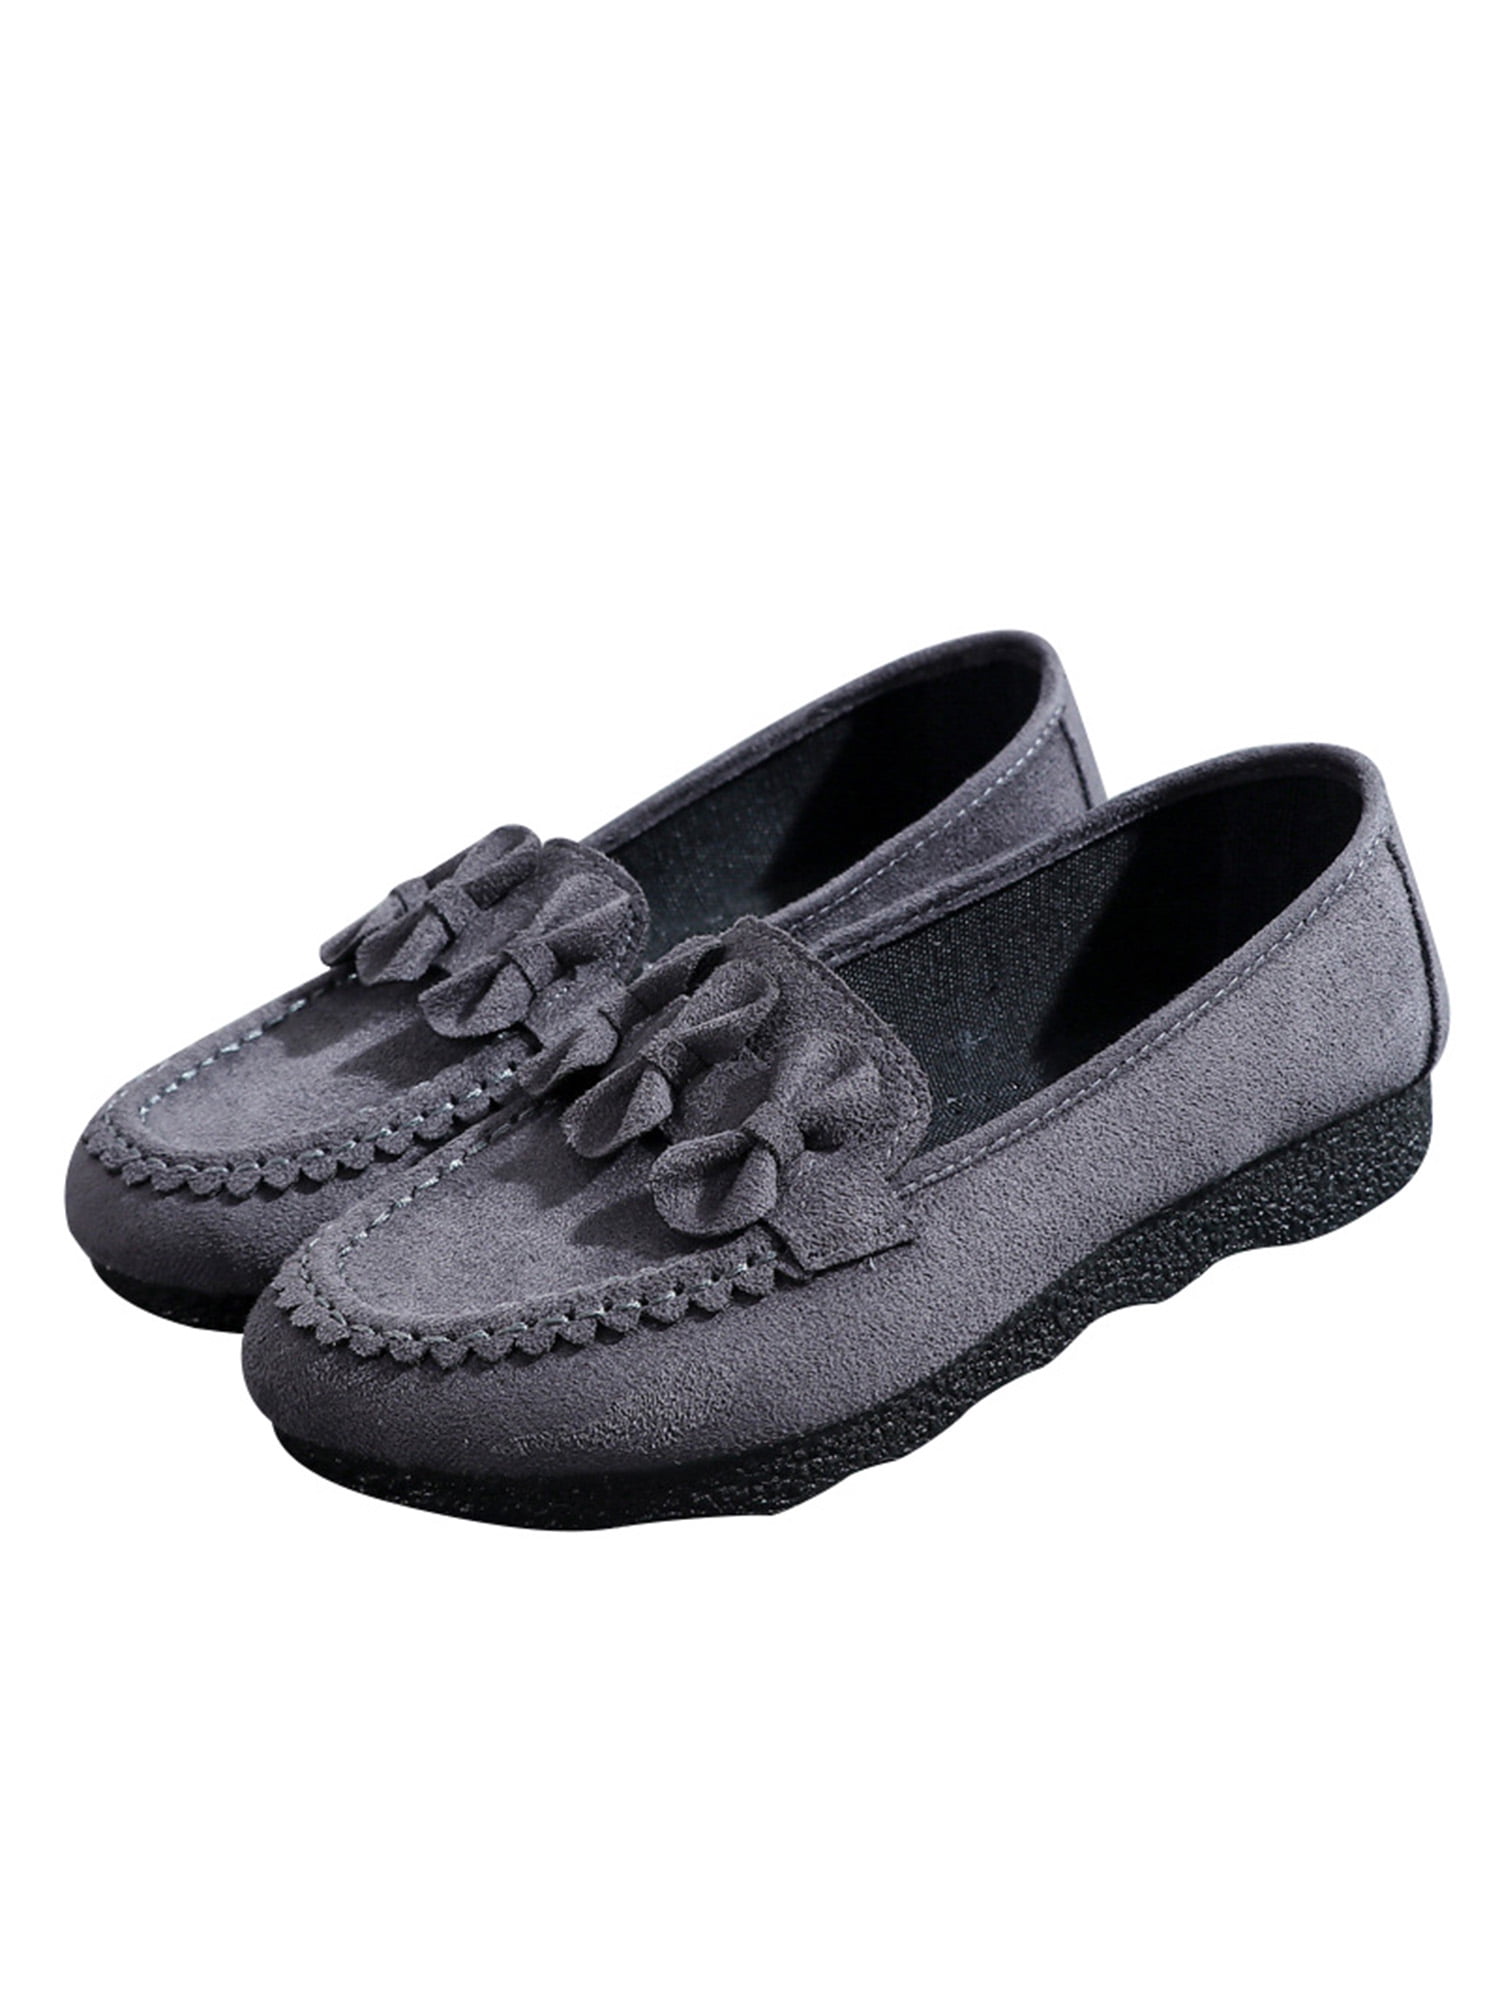 Details about   Women's Casual Slip On Leather shoes Moccasins Comfort Driving Flat Loafers Size